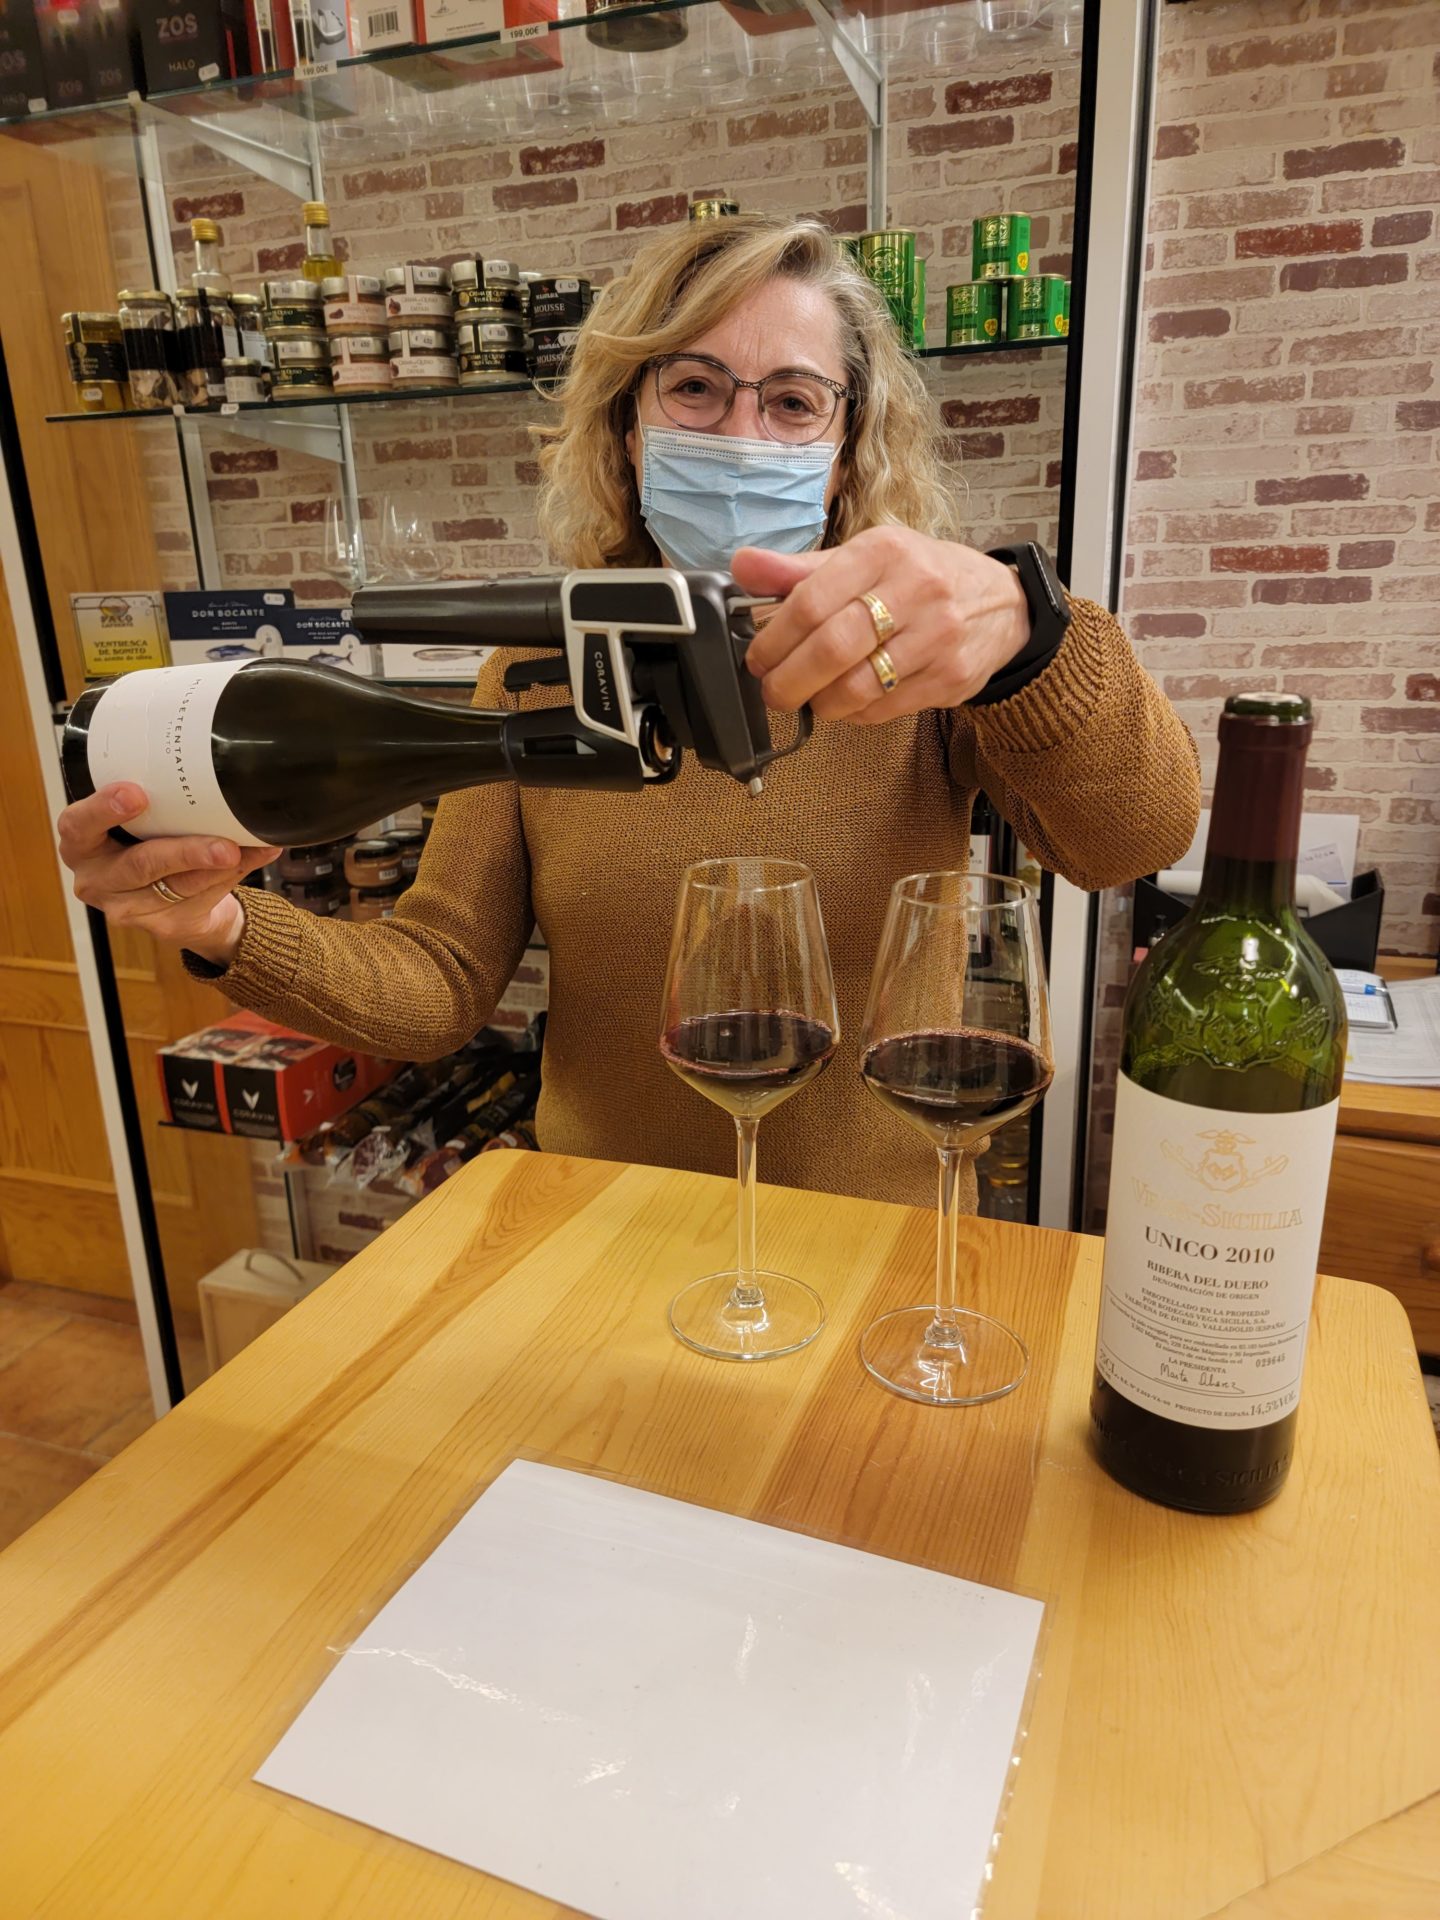 a woman wearing a face mask holding a wine bottle and glasses